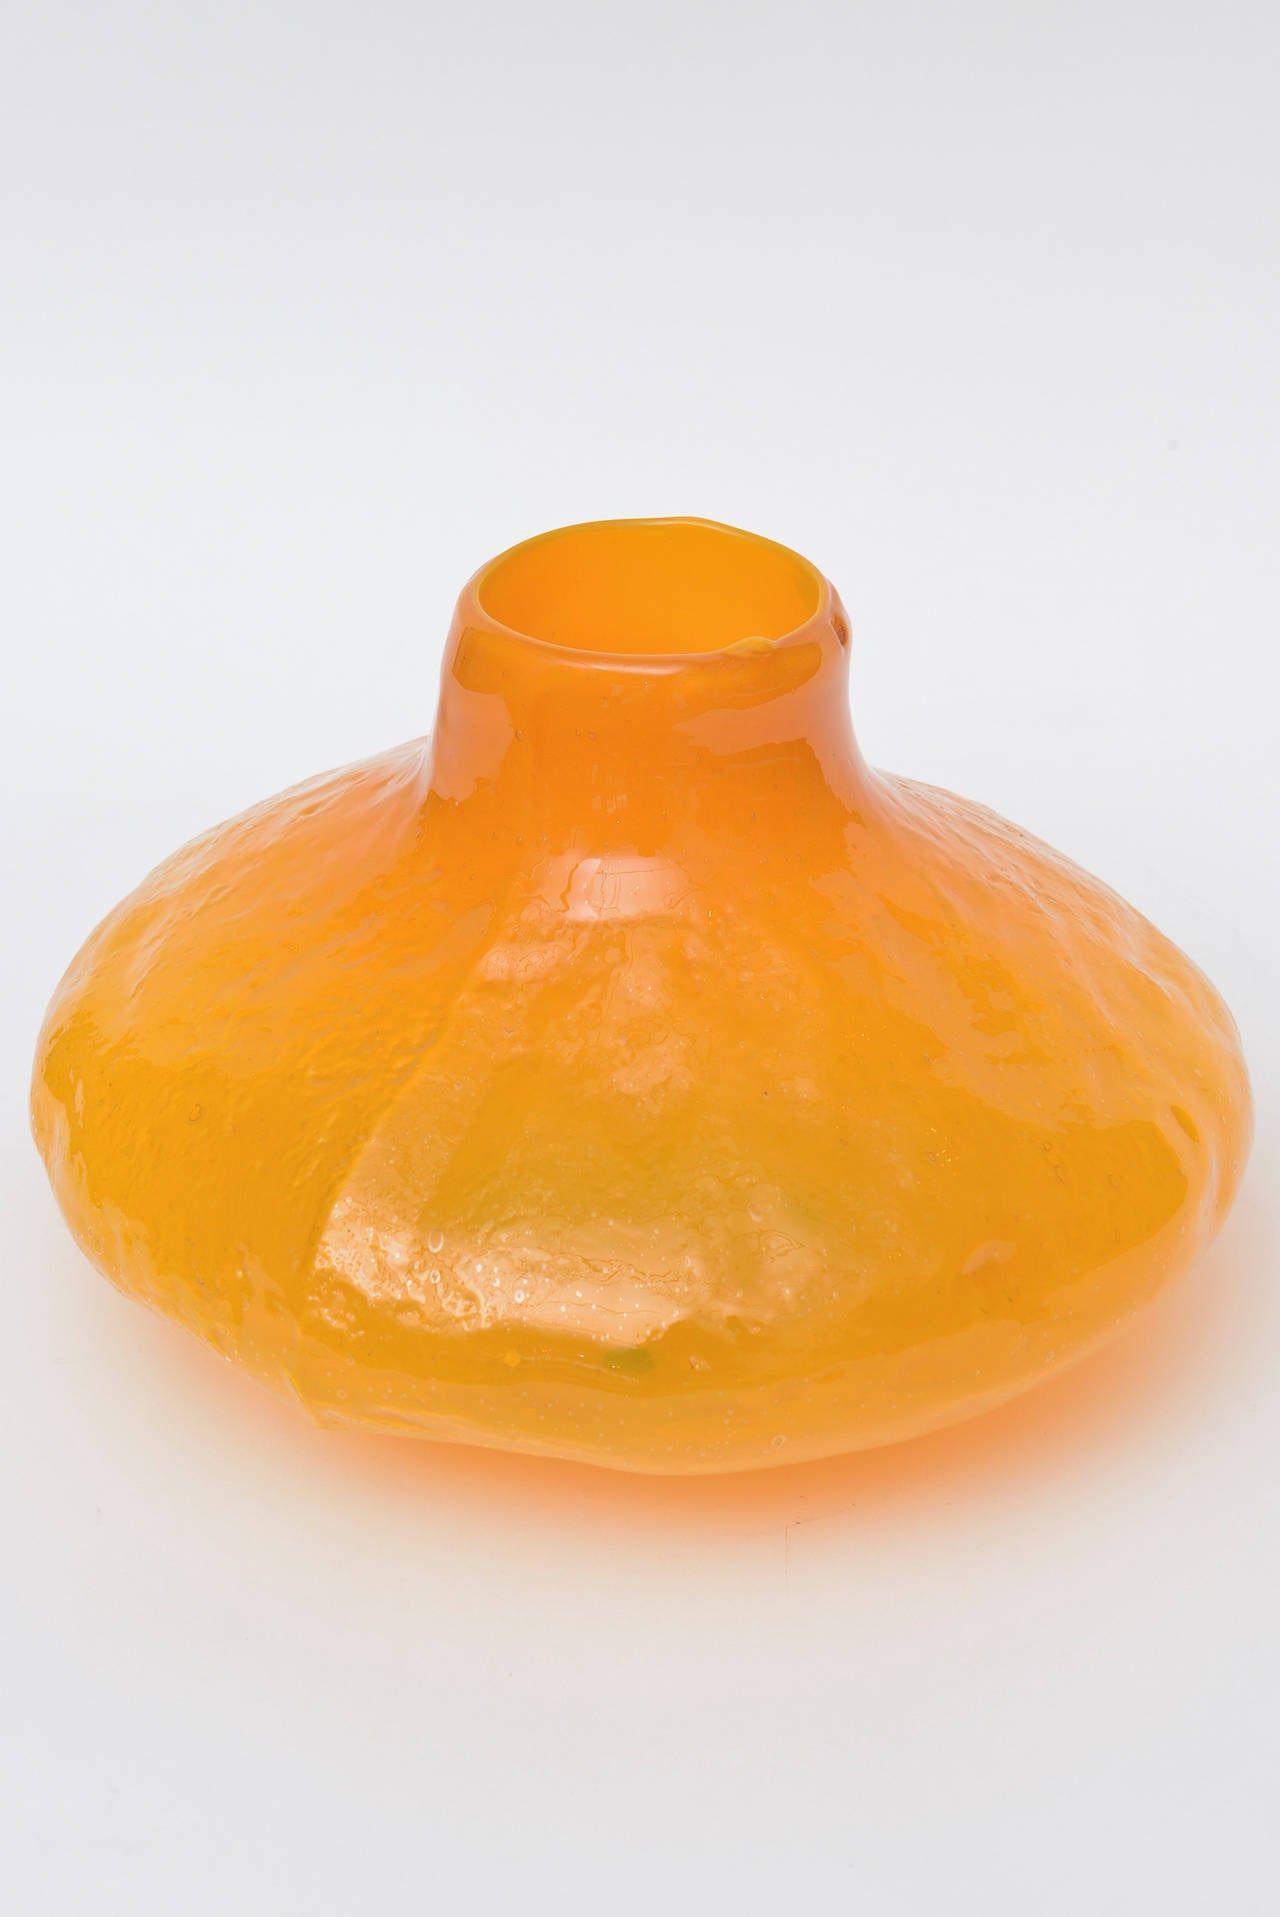 This large tangerine orange Blenko vessel or vase is very arresting and rare.
The glass is textured and pebbled, unusual color and shape. It has a gourd shape. Not too many of these around. This was a color from the 1960s.
This particular vase or